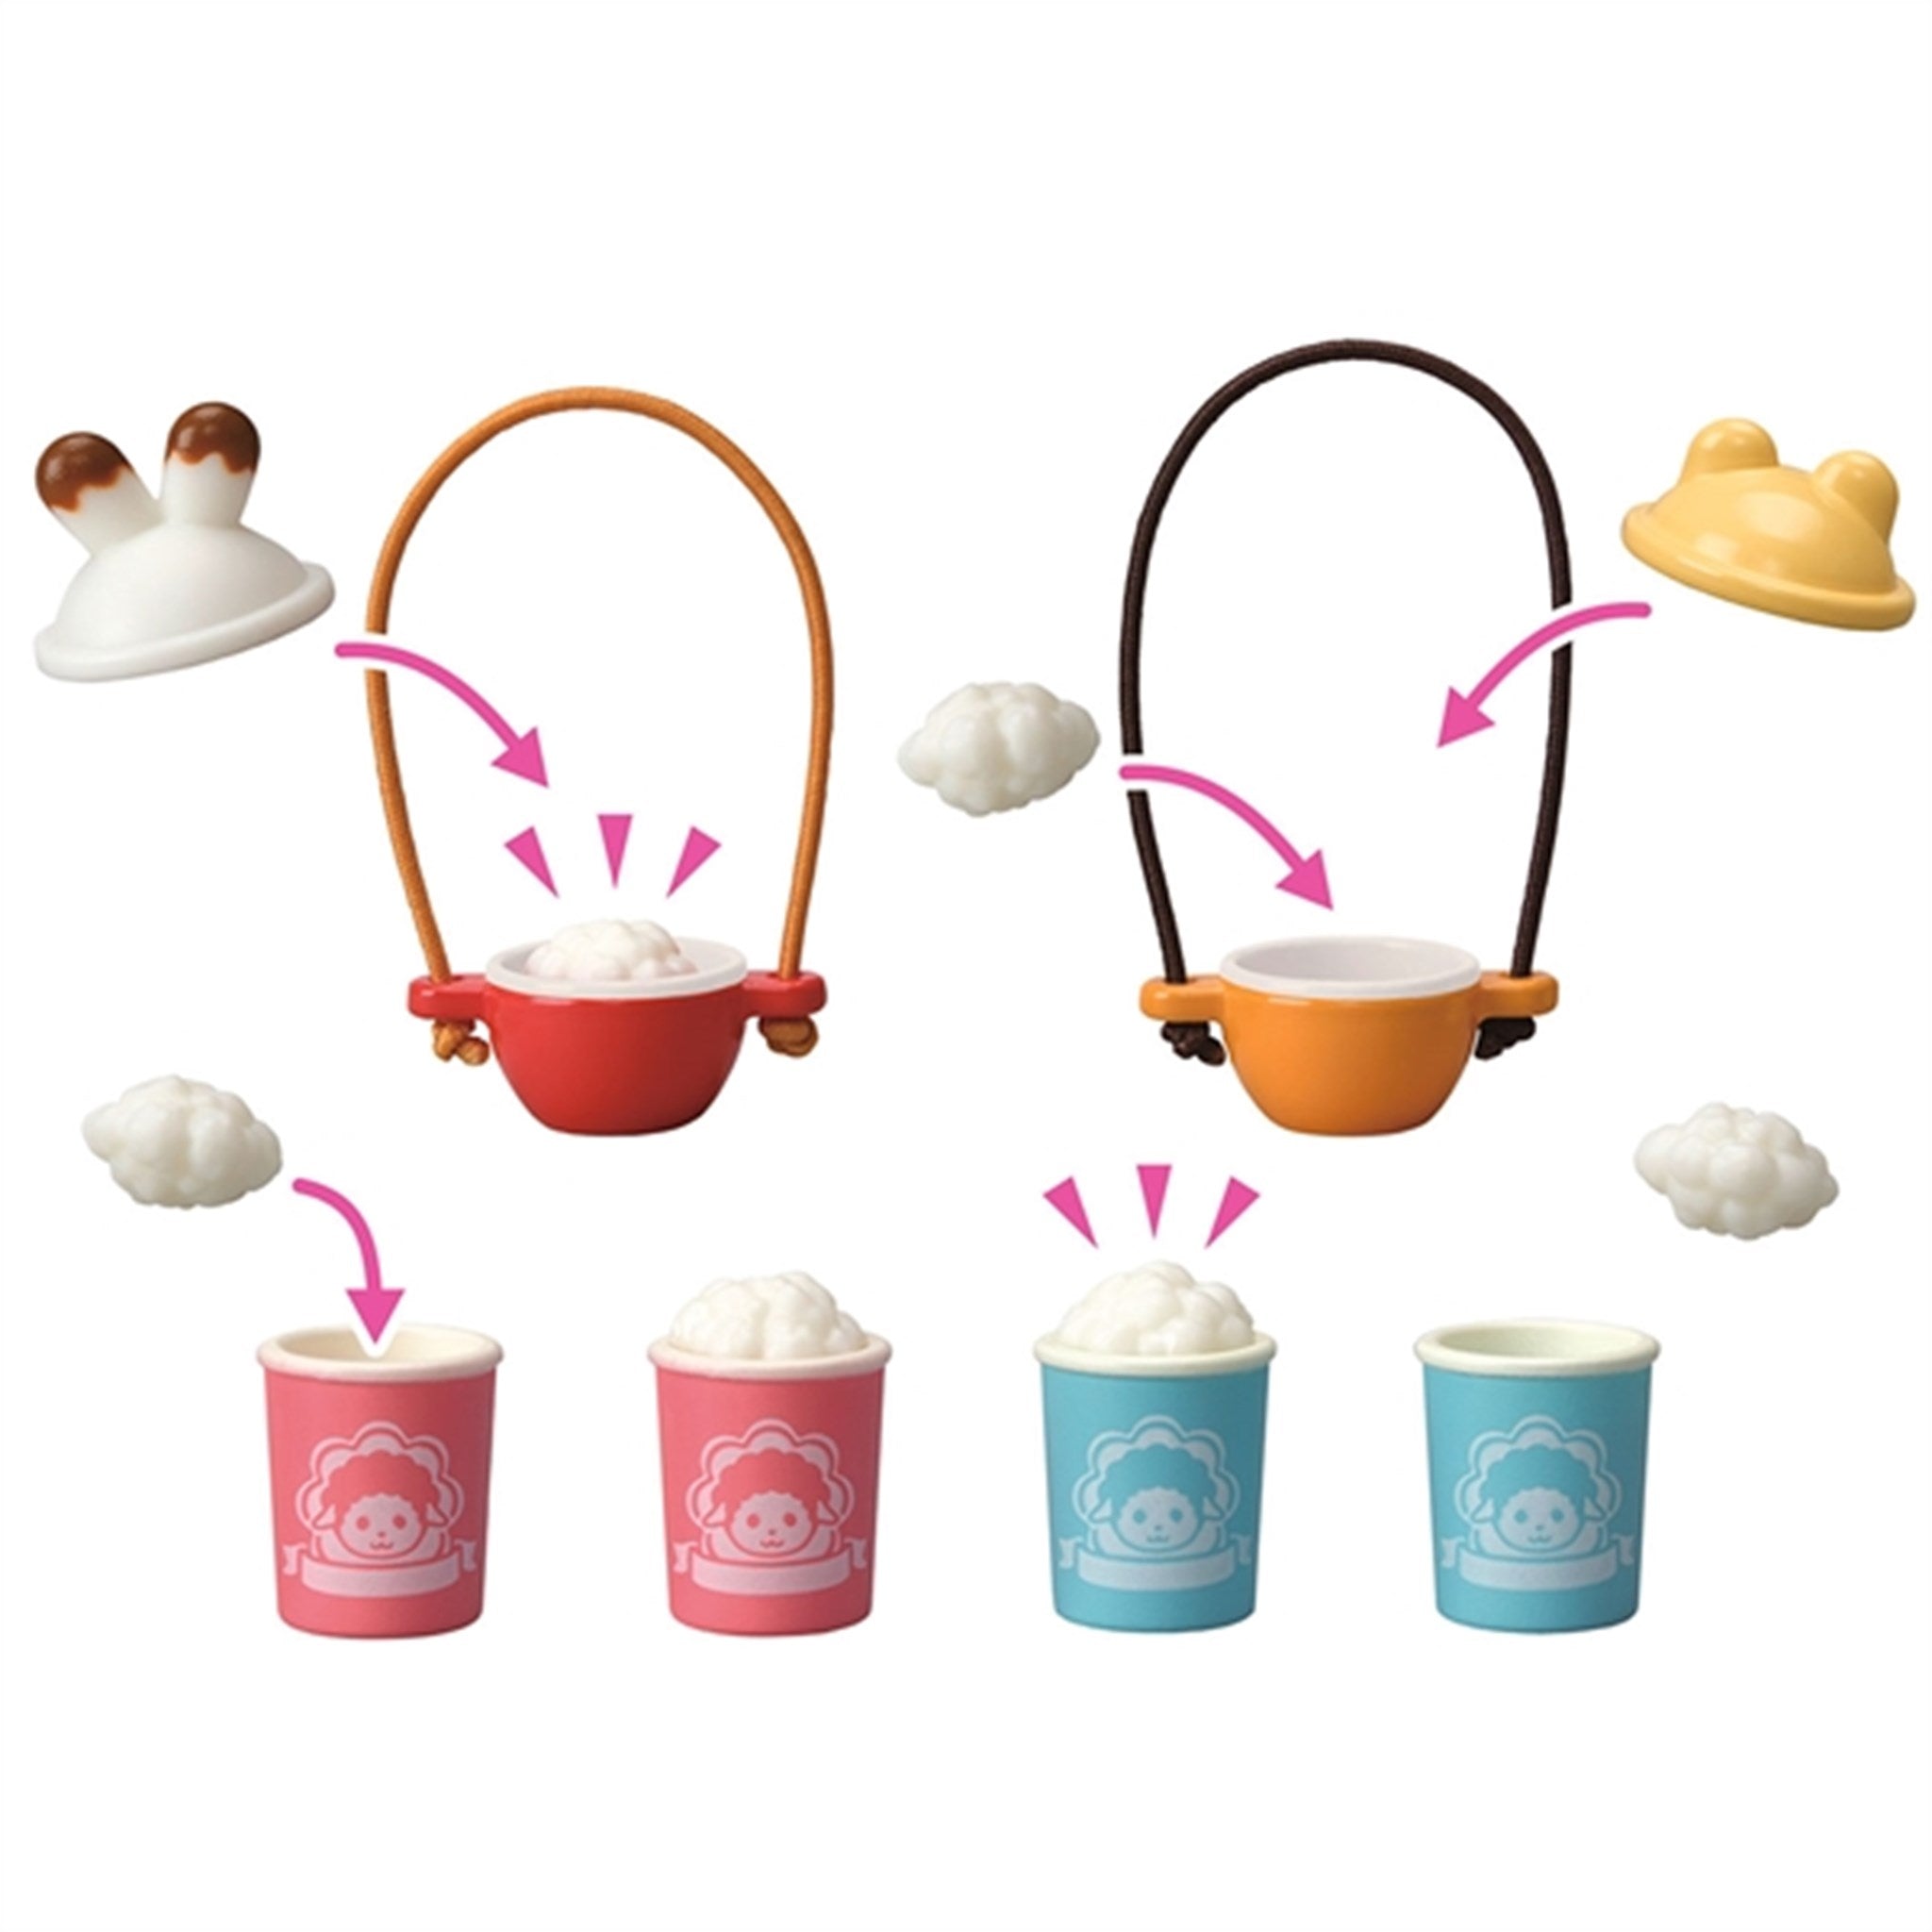 Sylvanian Families Popcorn Delivery Service With Figur 6